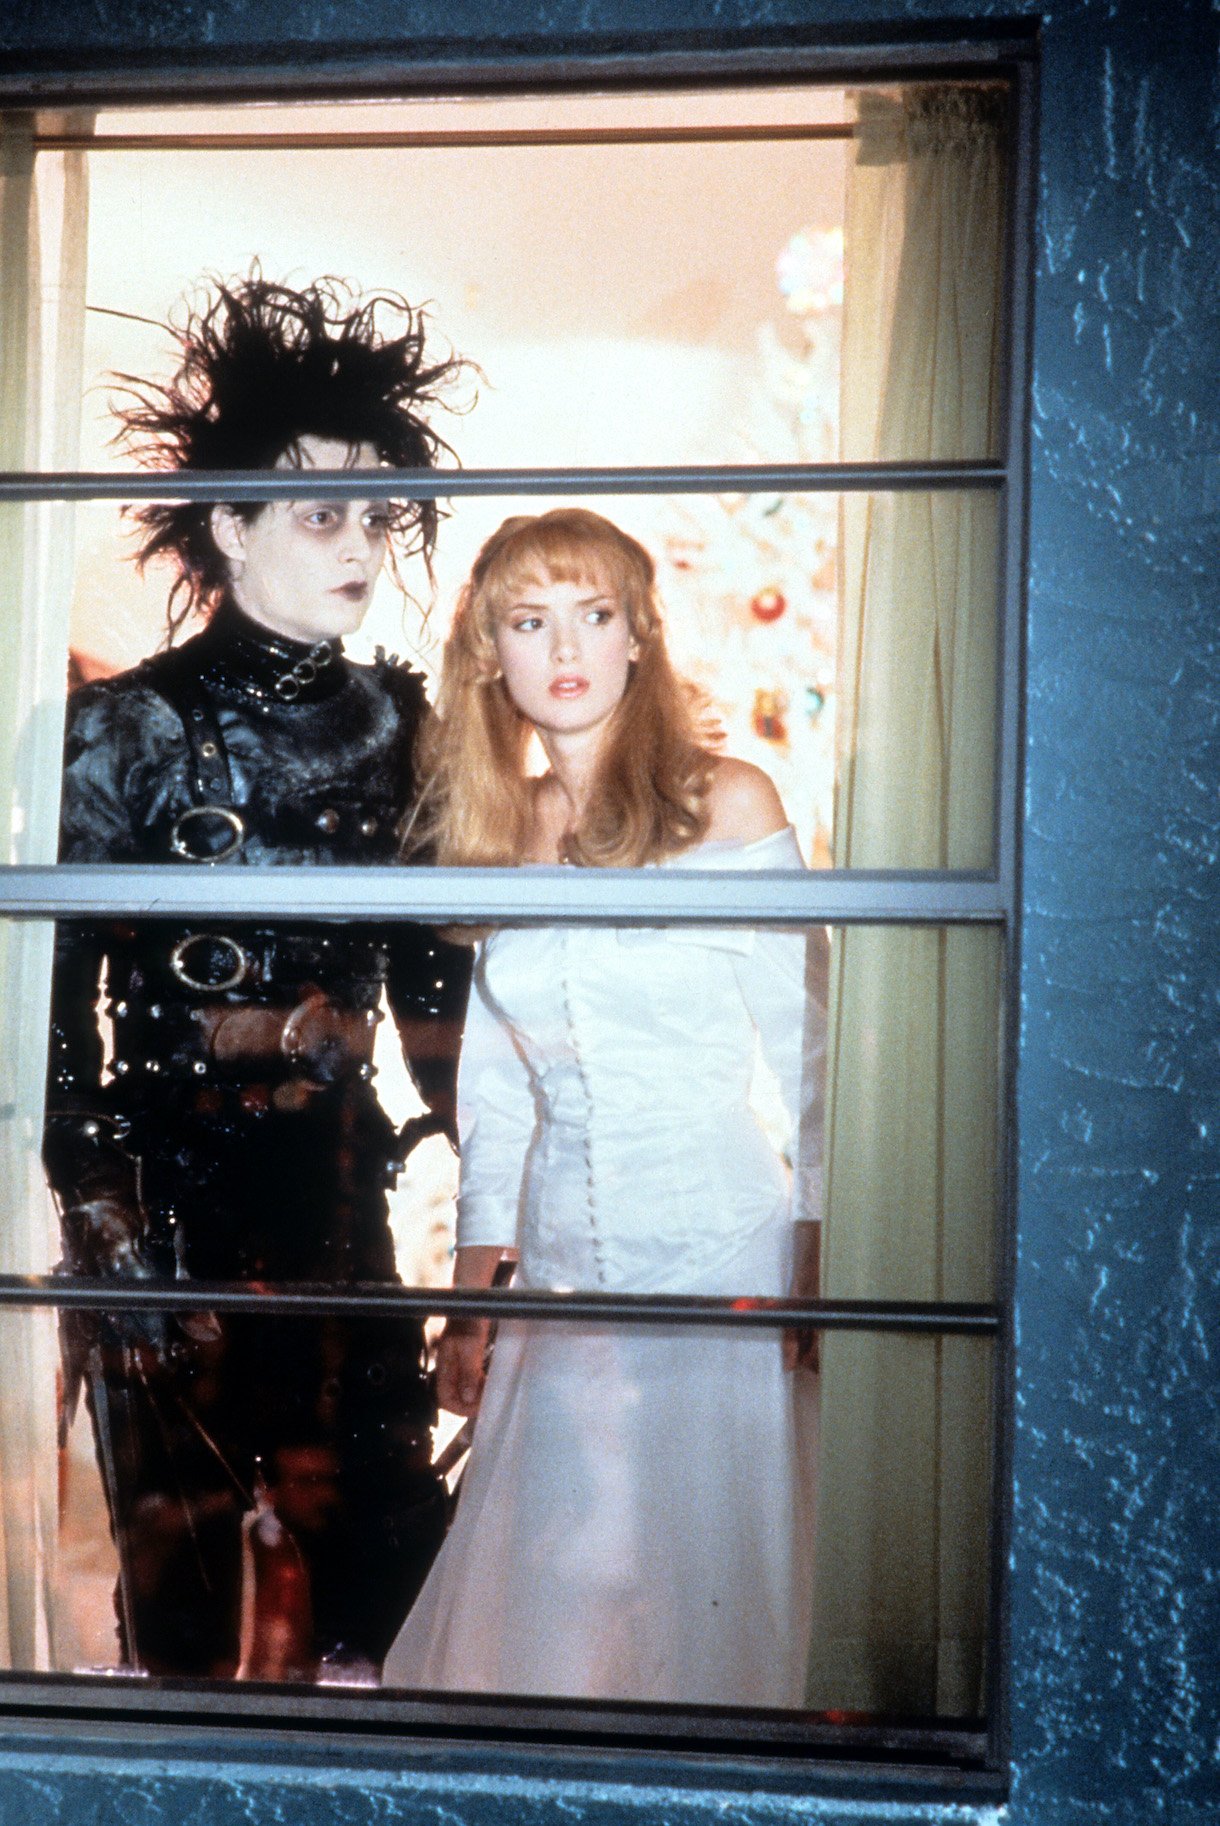 Johnny Depp and Winona Ryder looking out window in a scene from the film 'Edward Scissorhands', 1990